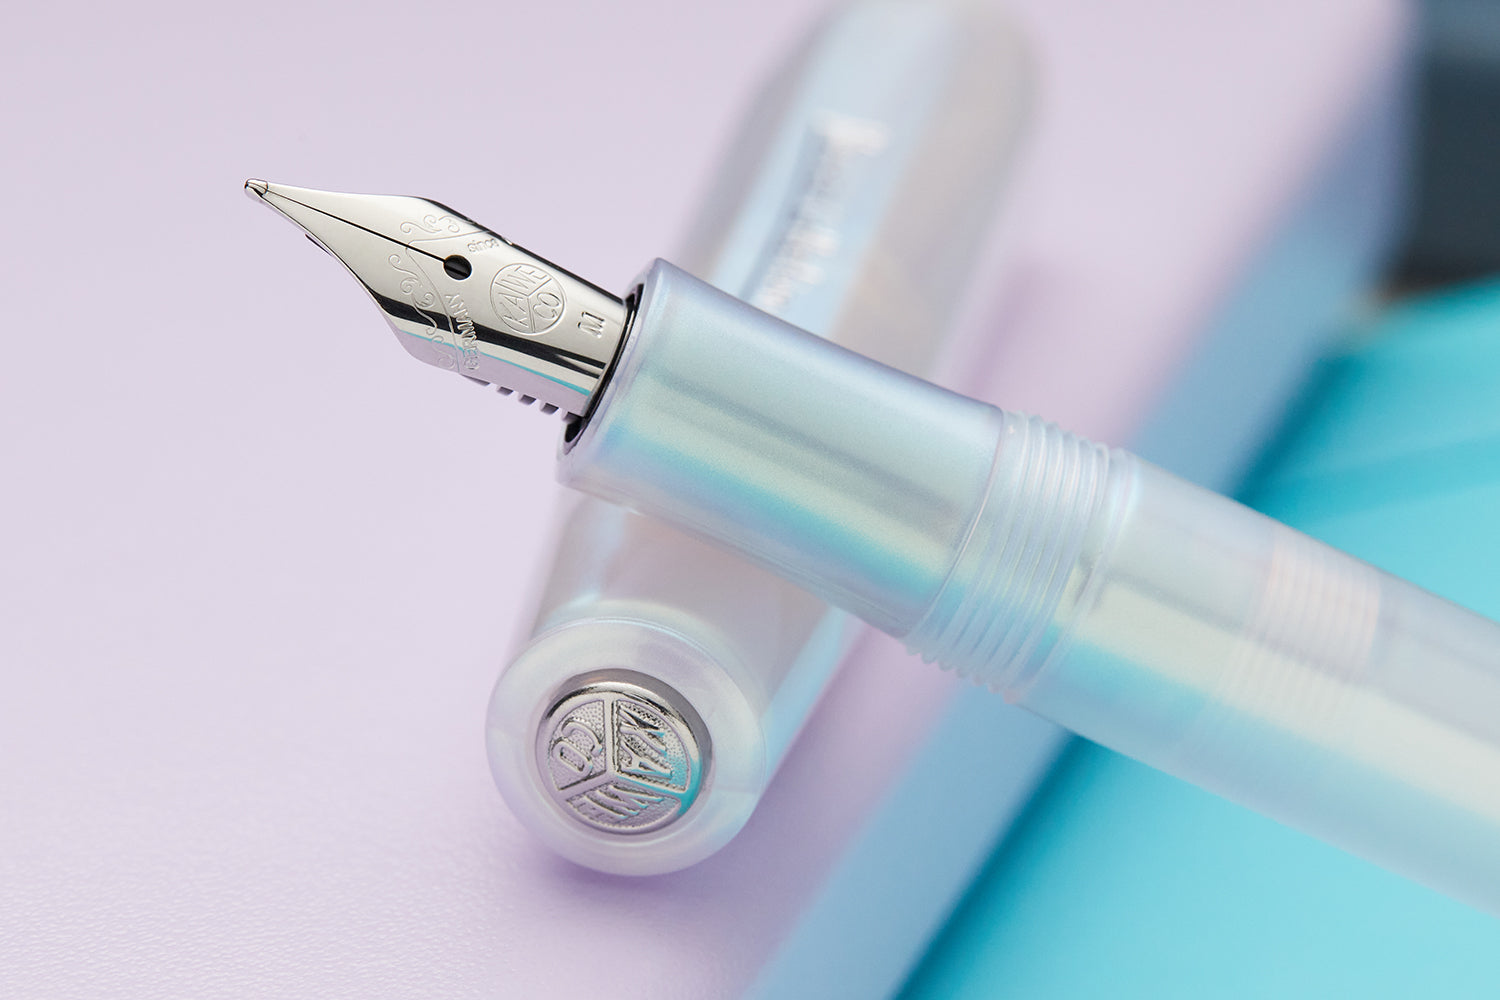 Kaweco Sport Pen - Iridescent Pearl (Limited Production) - The Pen Company